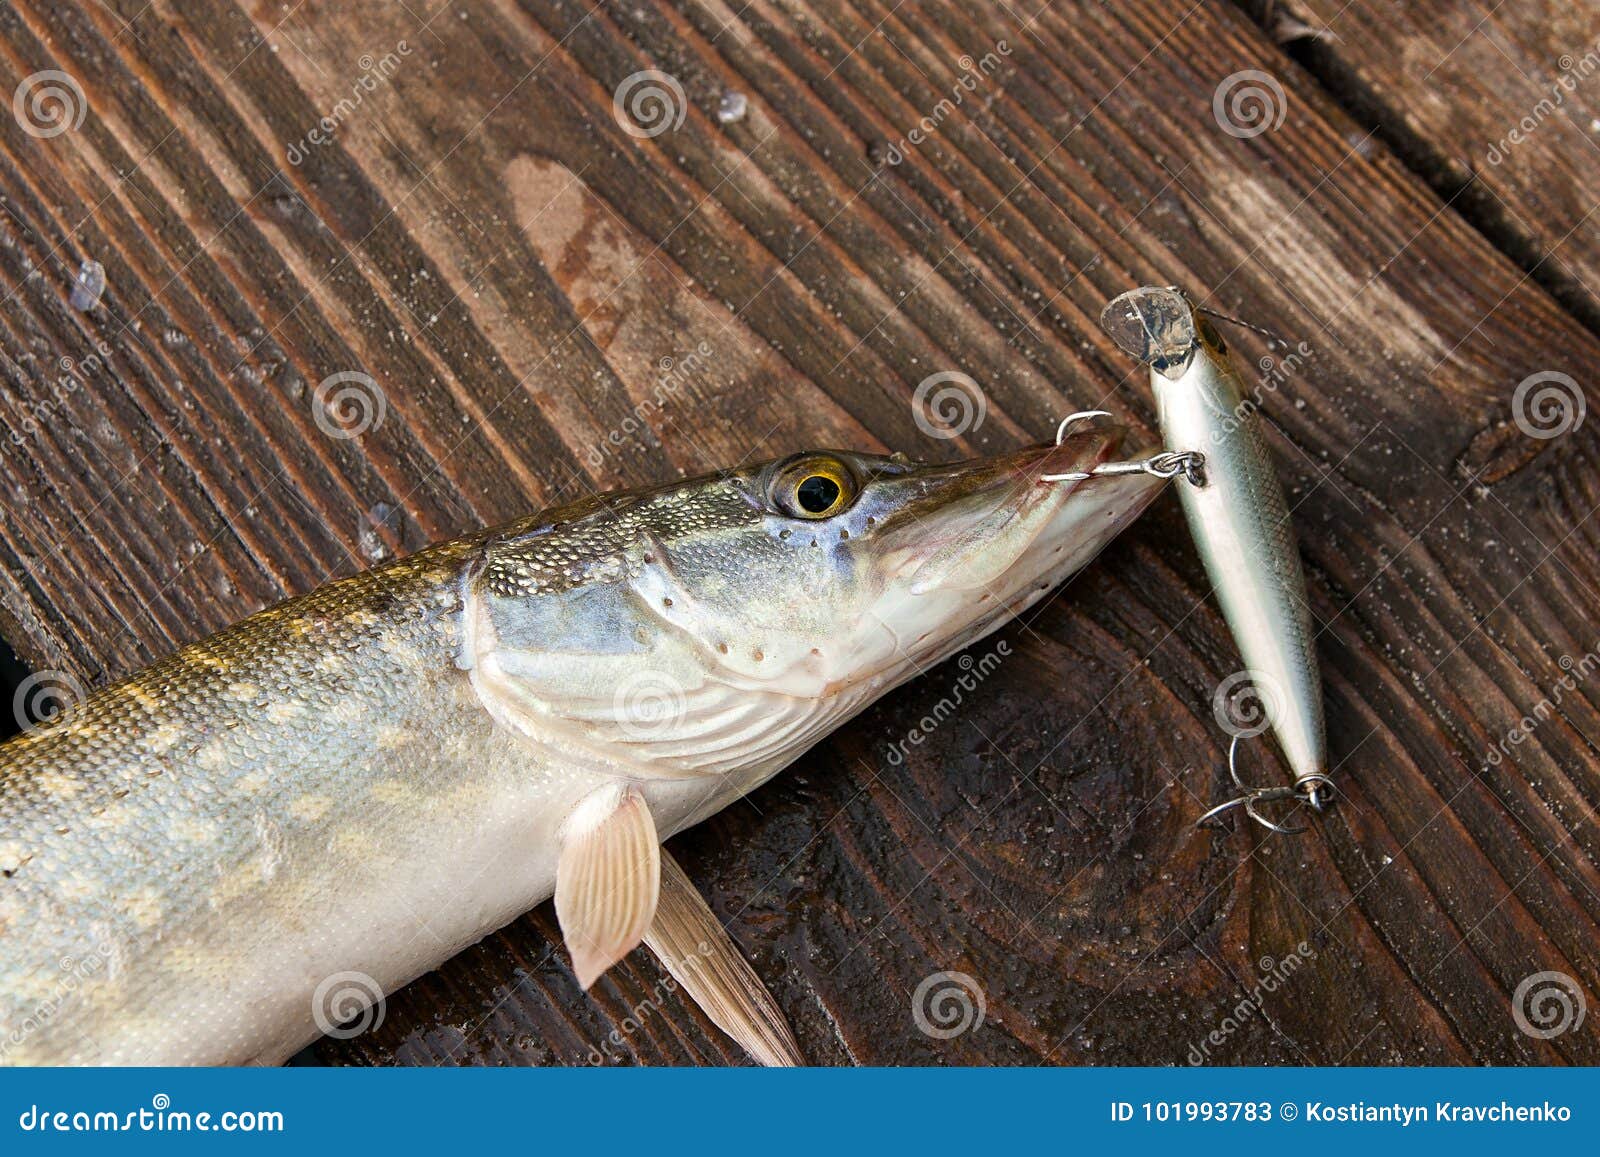 https://thumbs.dreamstime.com/z/freshwater-northern-pike-fish-know-as-esox-lucius-lying-vintage-wooden-background-fishing-concept-good-catch-big-lure-101993783.jpg